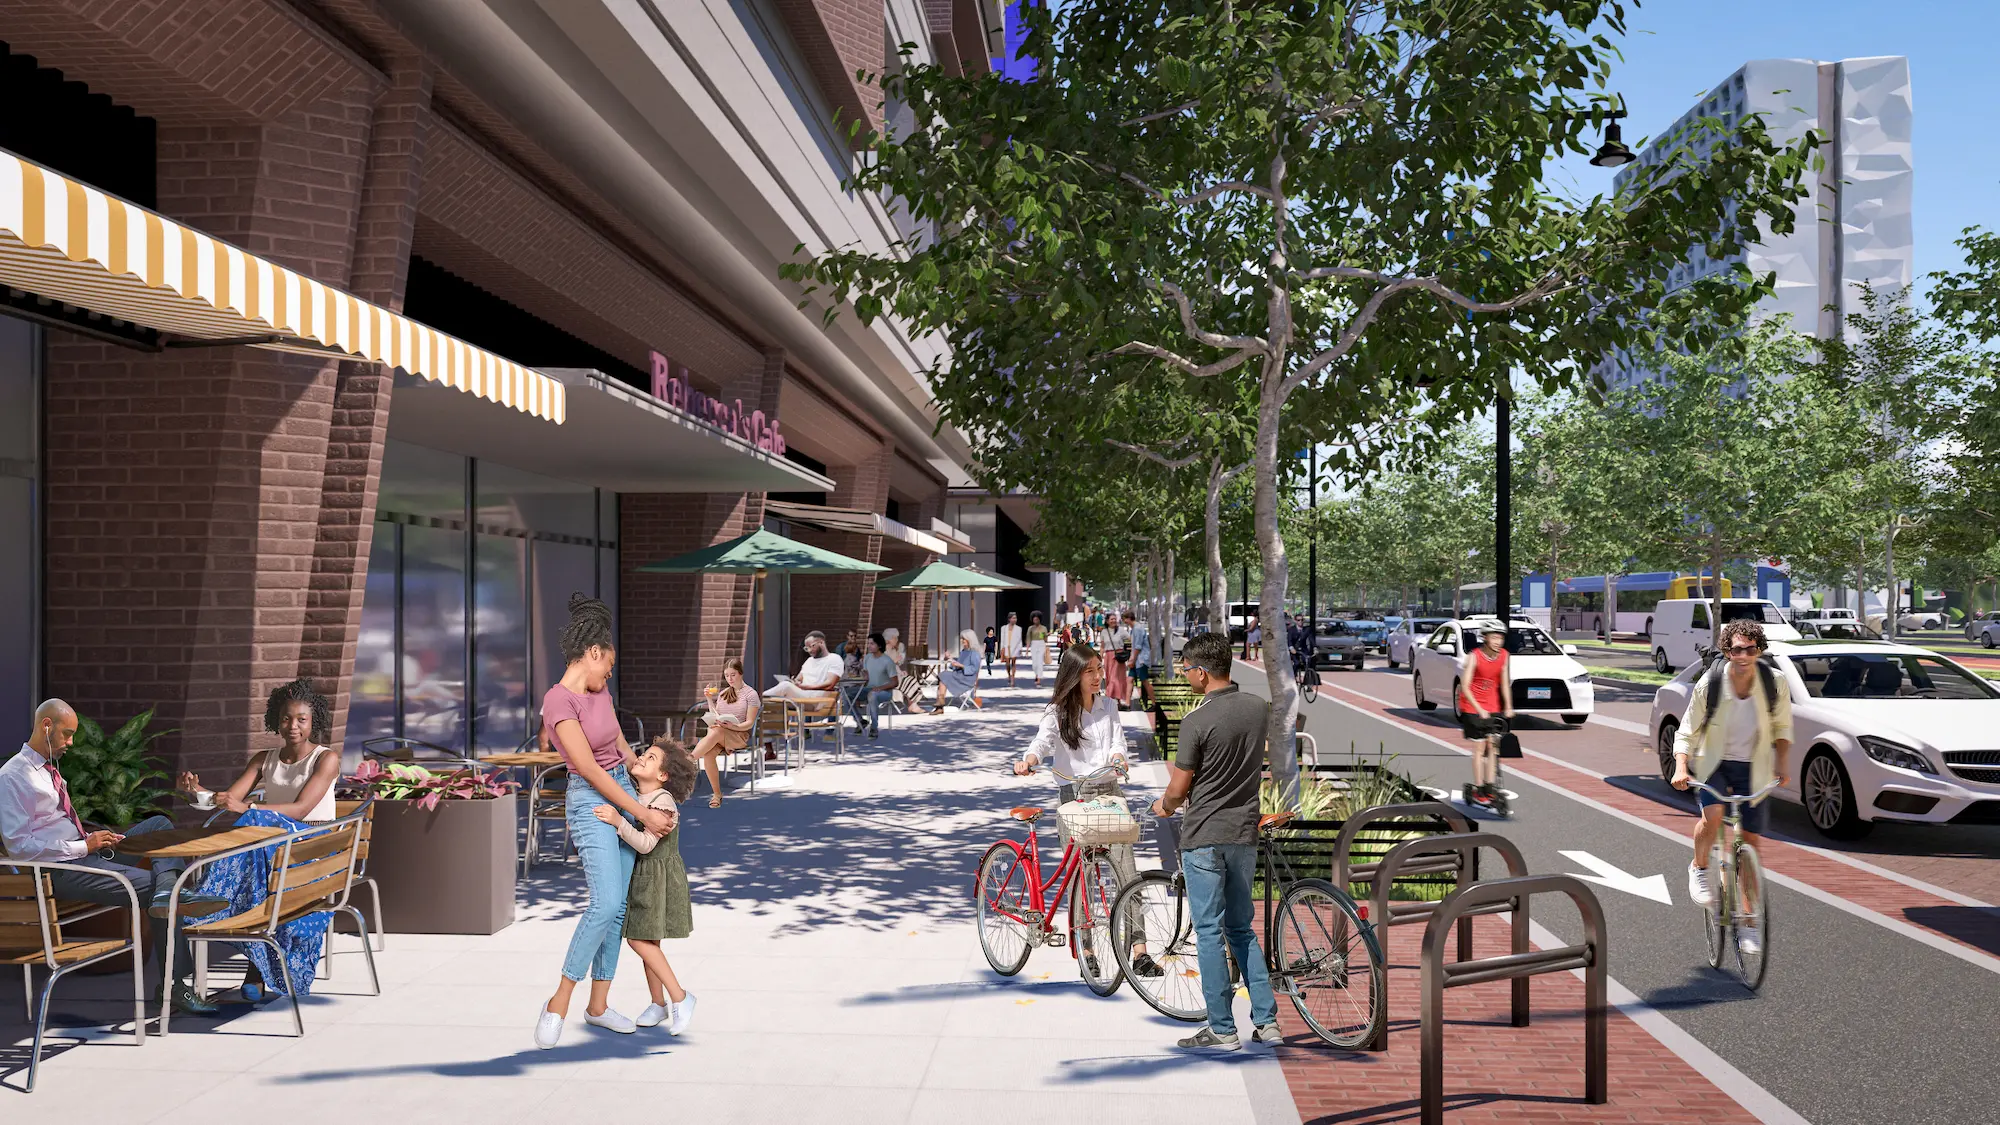 rendering of what Cedar Riverside could look like with a transit boulevard, with changes in land use that allow new businesses and new transit options like bus rapid transit and separated bike paths, wide sidewalks, and green space